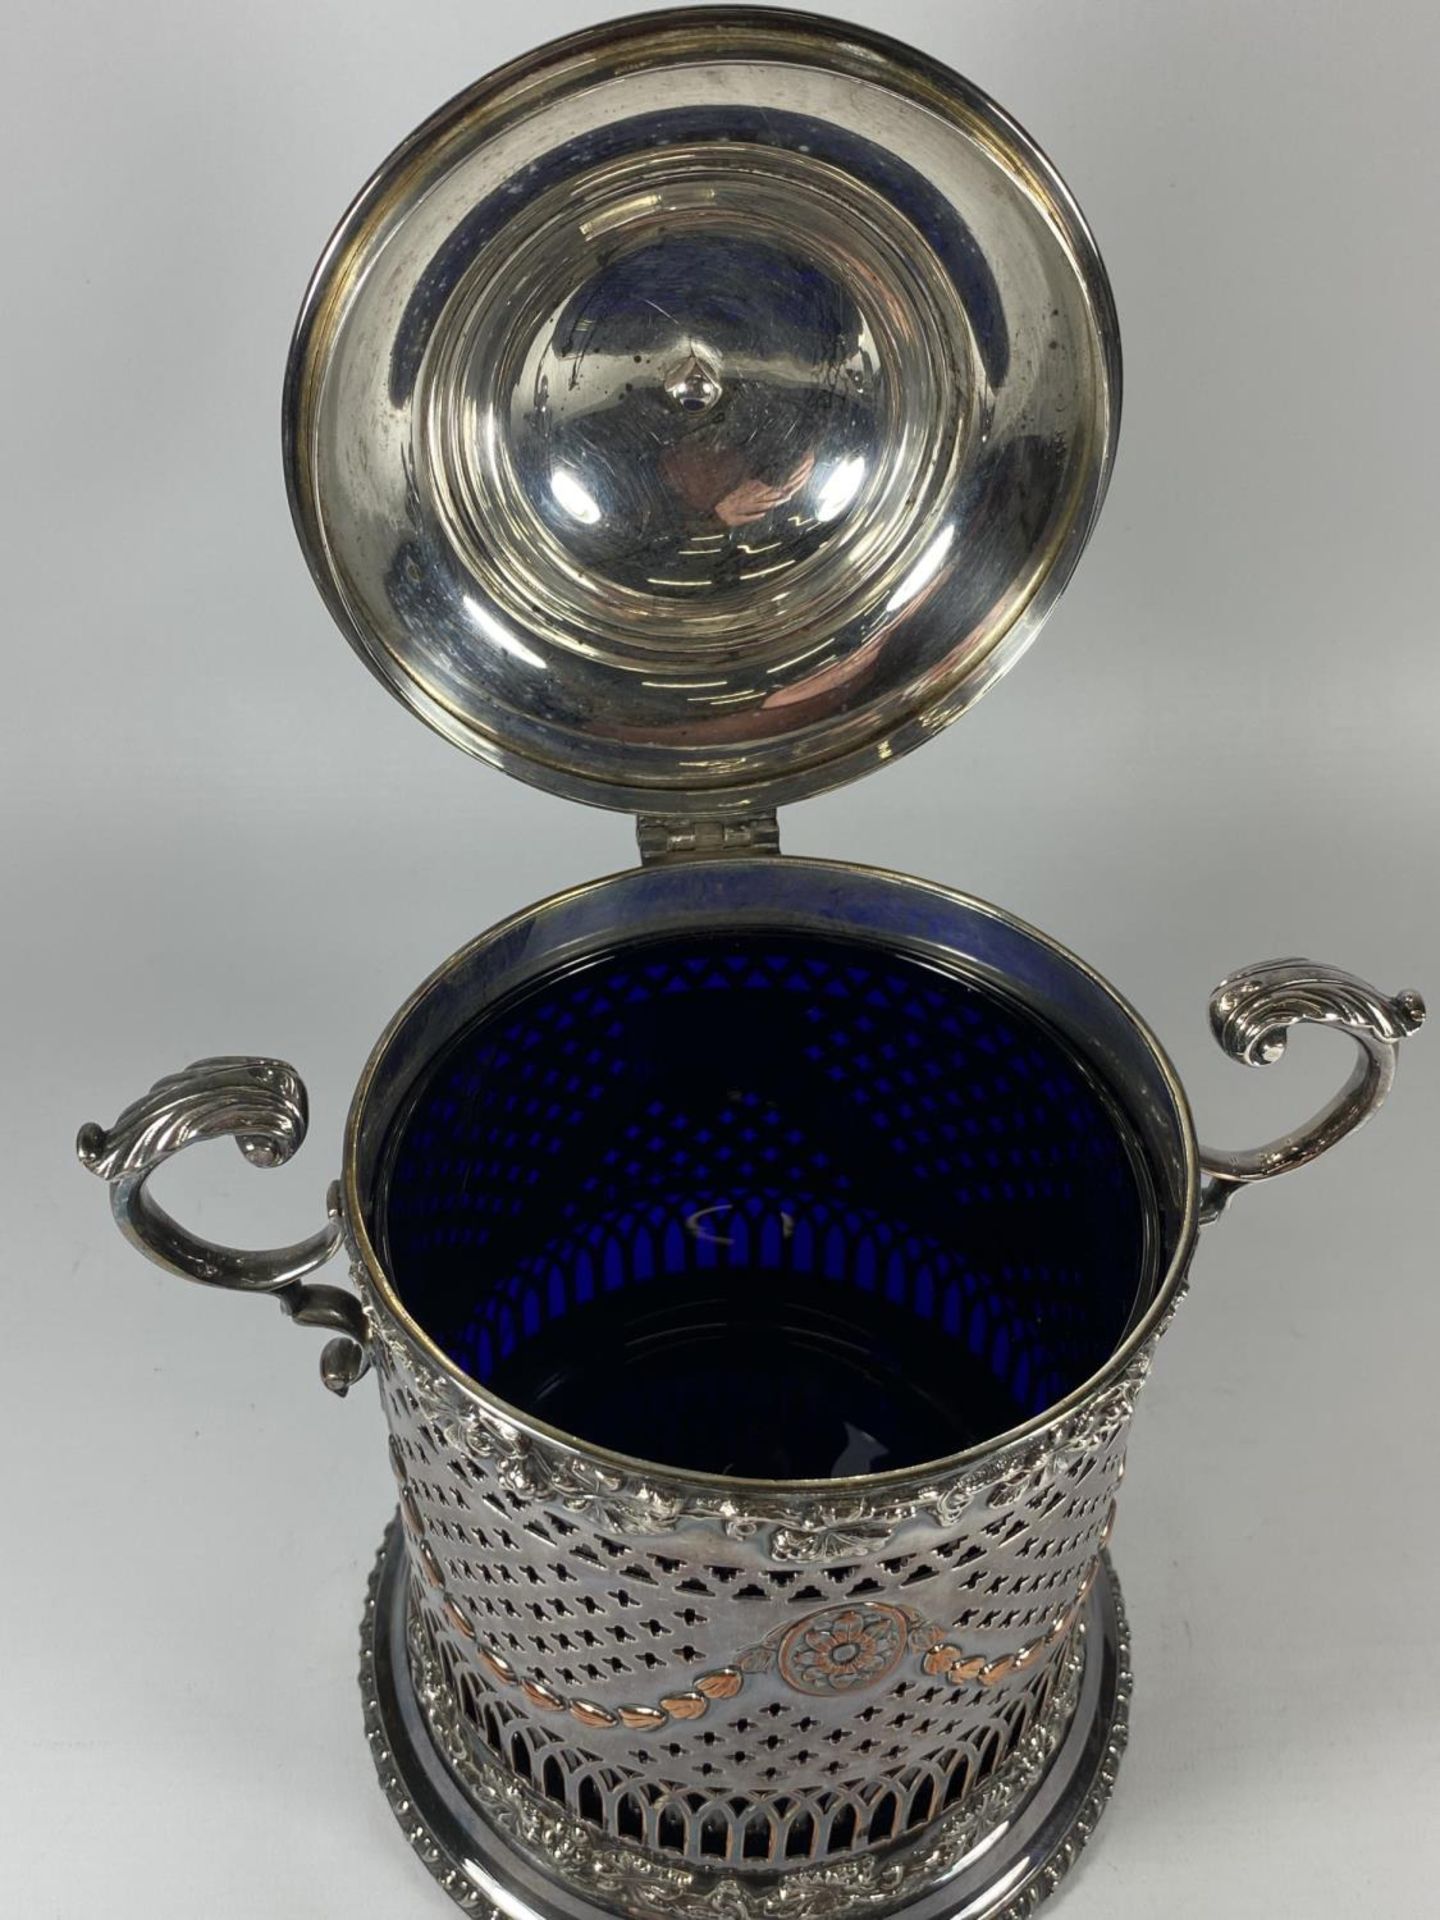 A GOOD QUALITY TWIN HANDLED SILVER PLATED BISCUIT BARELL WITH INNER BLUE GLASS LINER, HEIGHT 20CM - Image 4 of 5